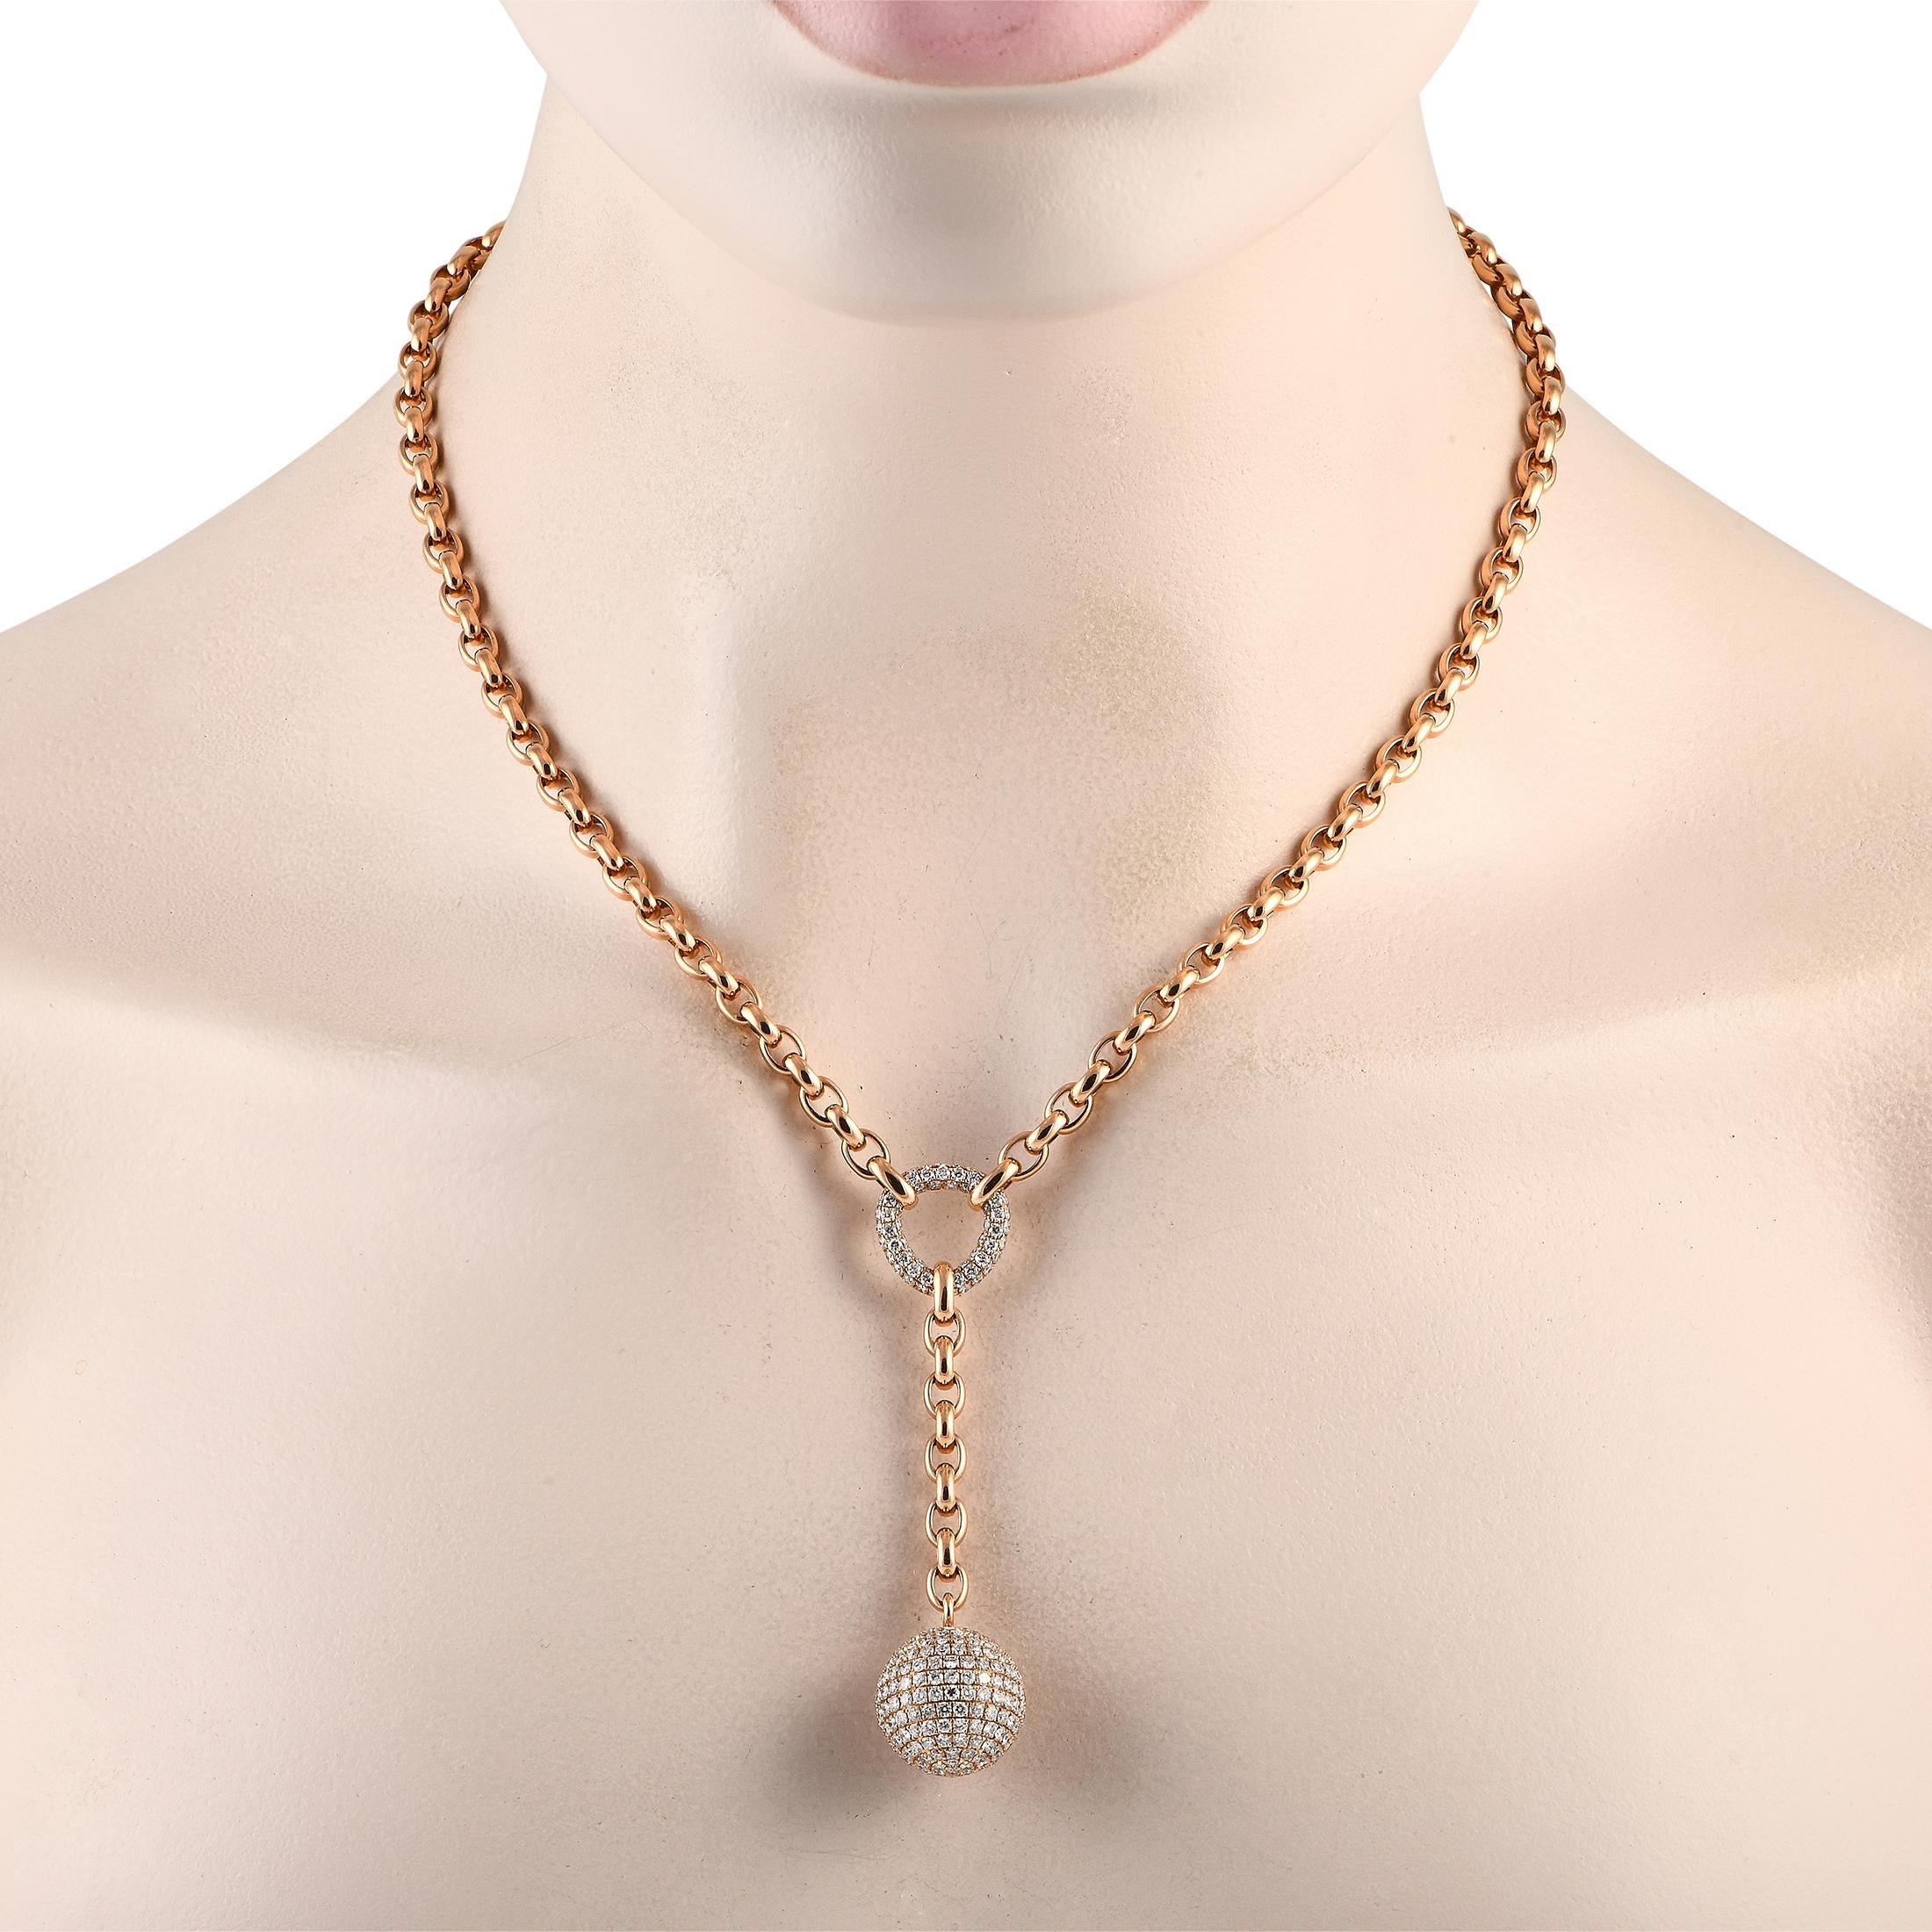 This luxurious 18K Rose Gold necklace is meant to make a statement. A bold chain measuring 17” long provides a stunning foundation for this impeccably crafted piece, which also includes sparkling diamond accents totaling 5.40 carats. At the center,